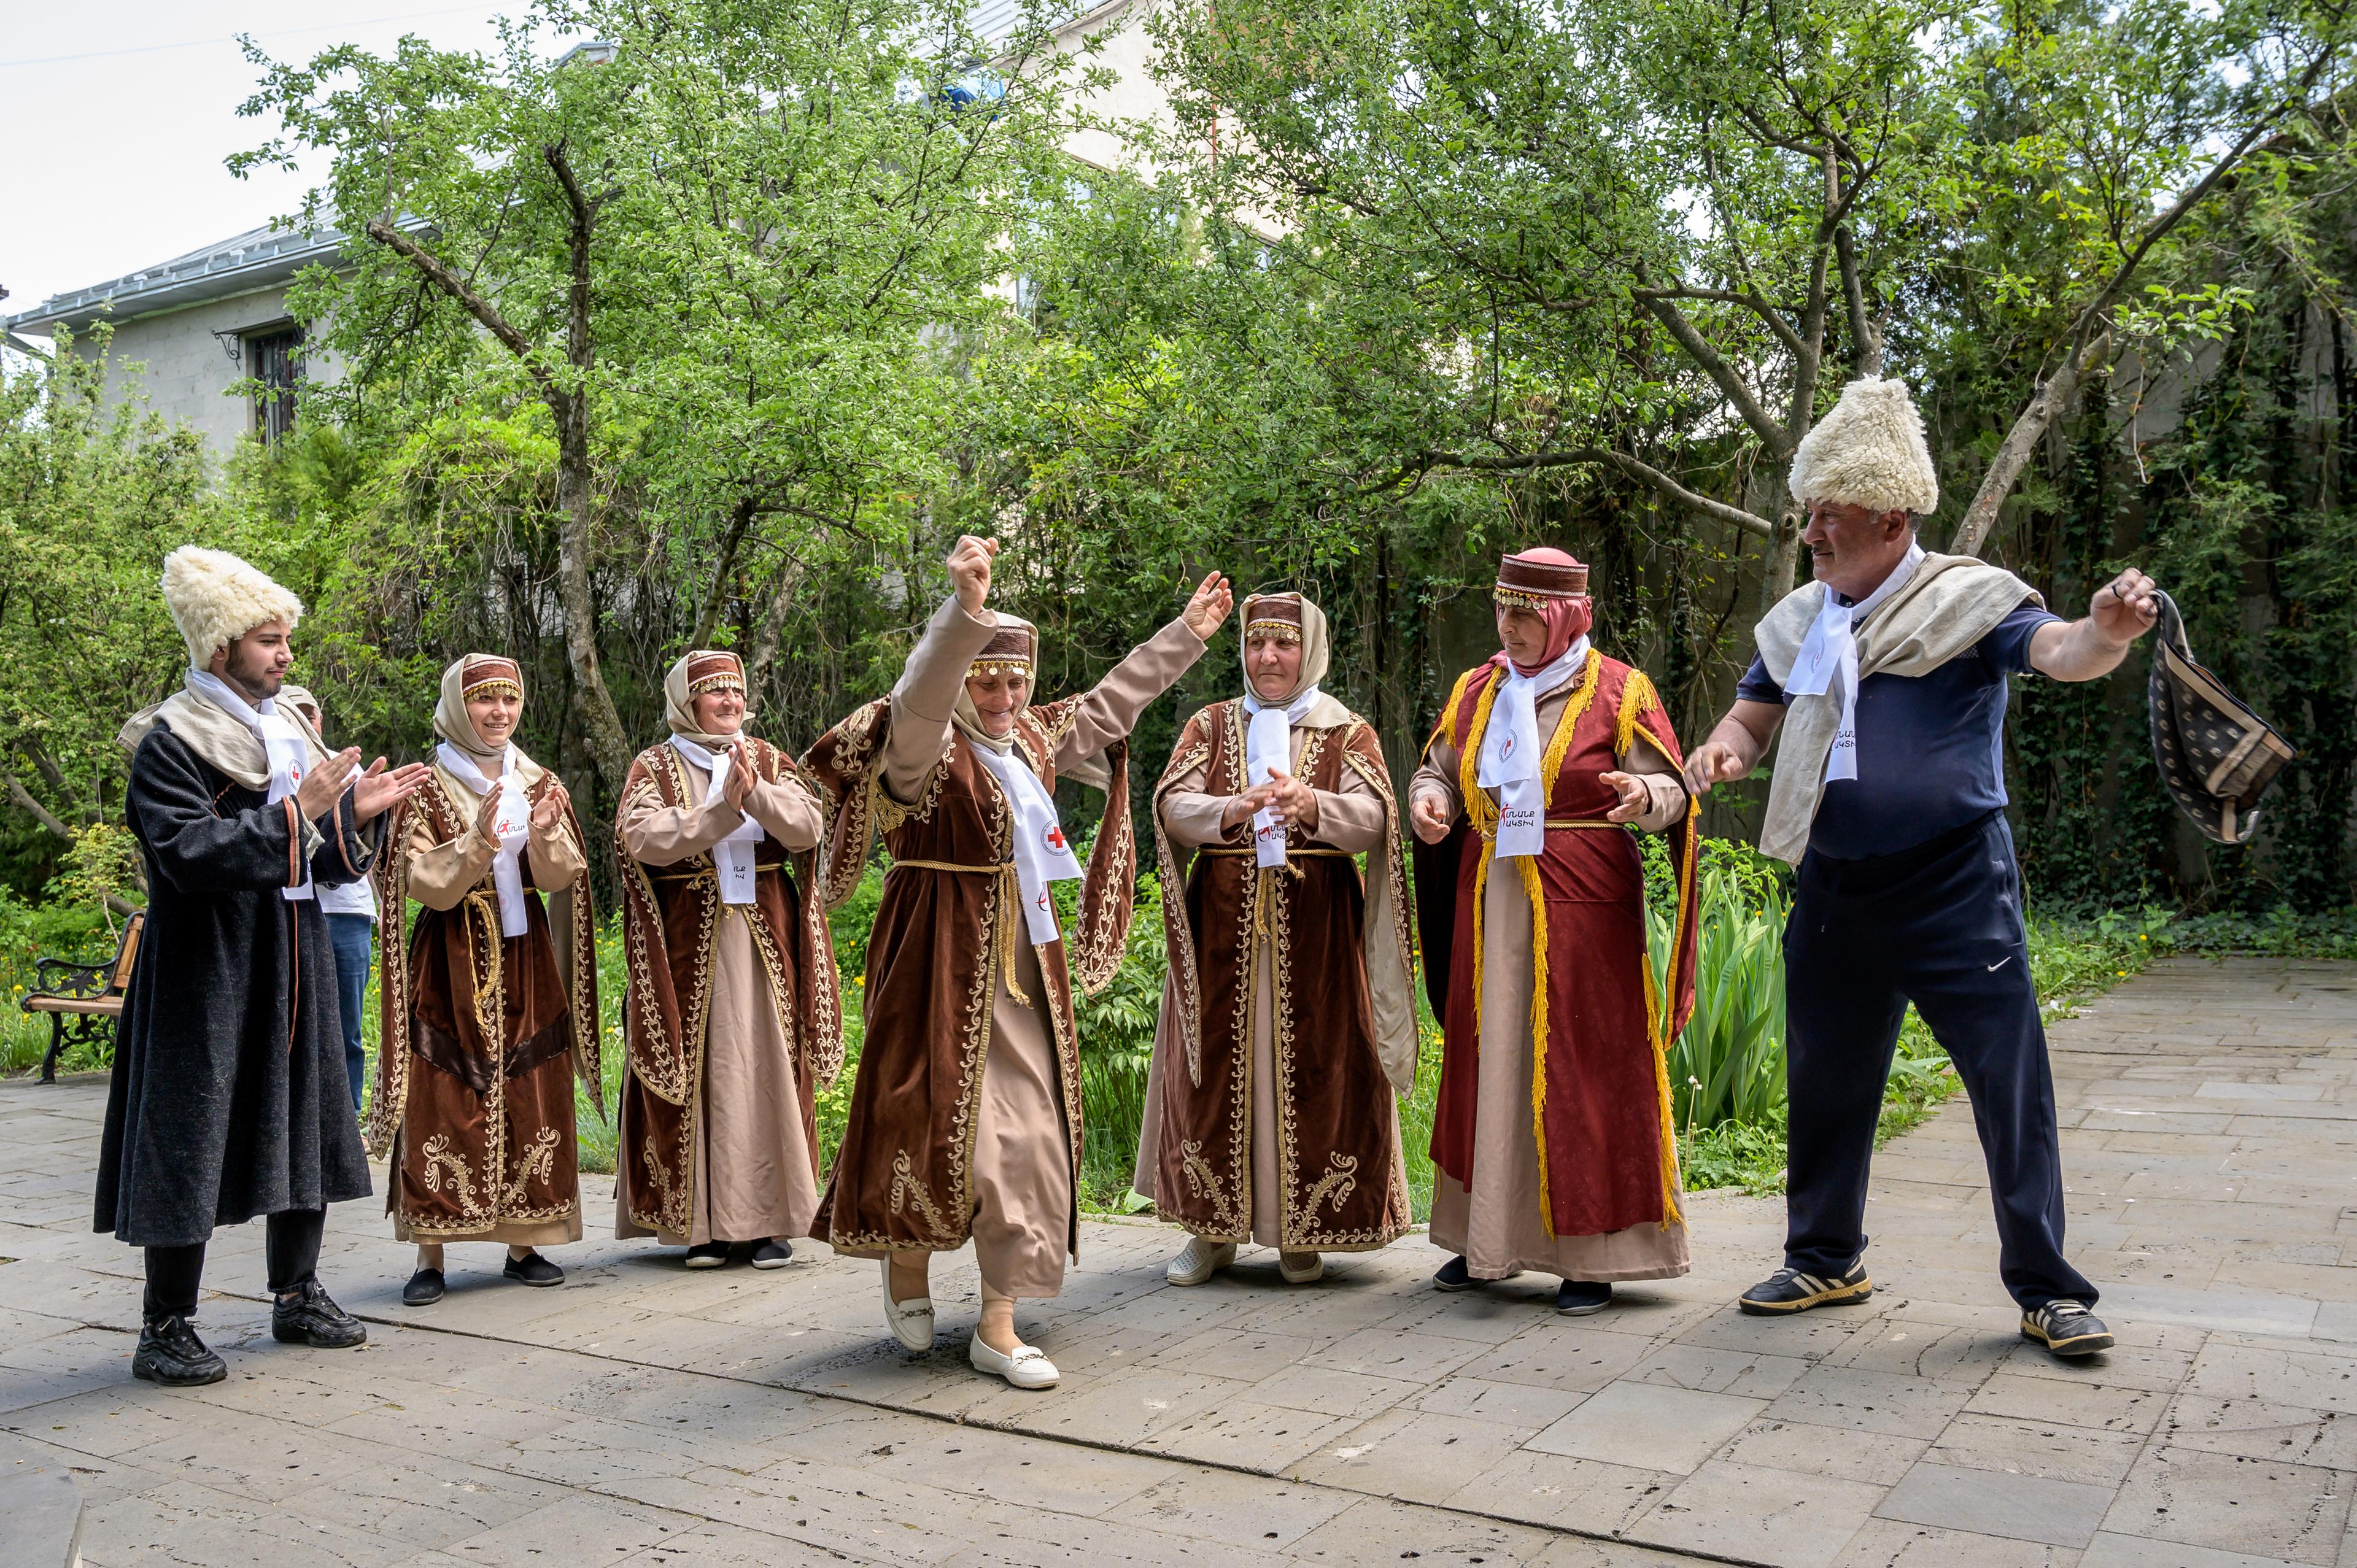 A picture showing a group of men and women dancing in traditional clothes. An area outside with trees.